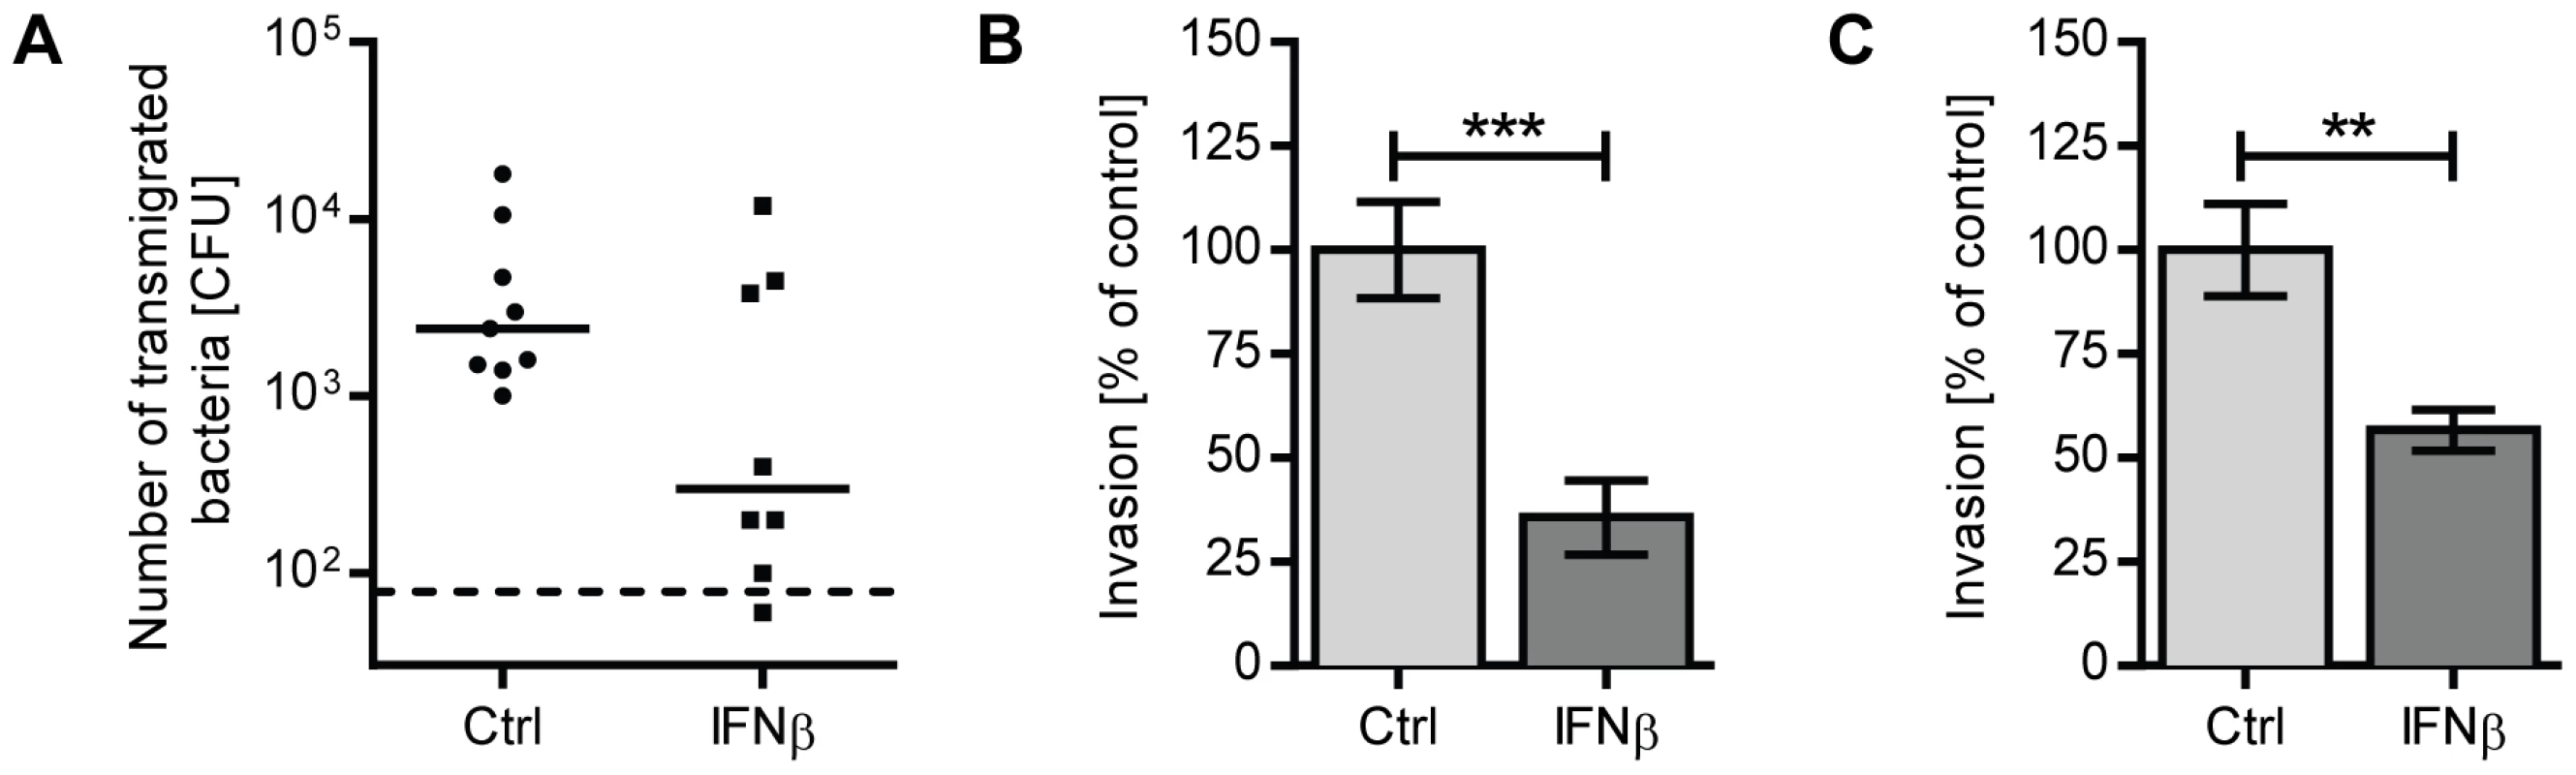 IFNβ reduces pneumococcal transmigration and invasion of lung epithelial cells and endothelial cell lines.